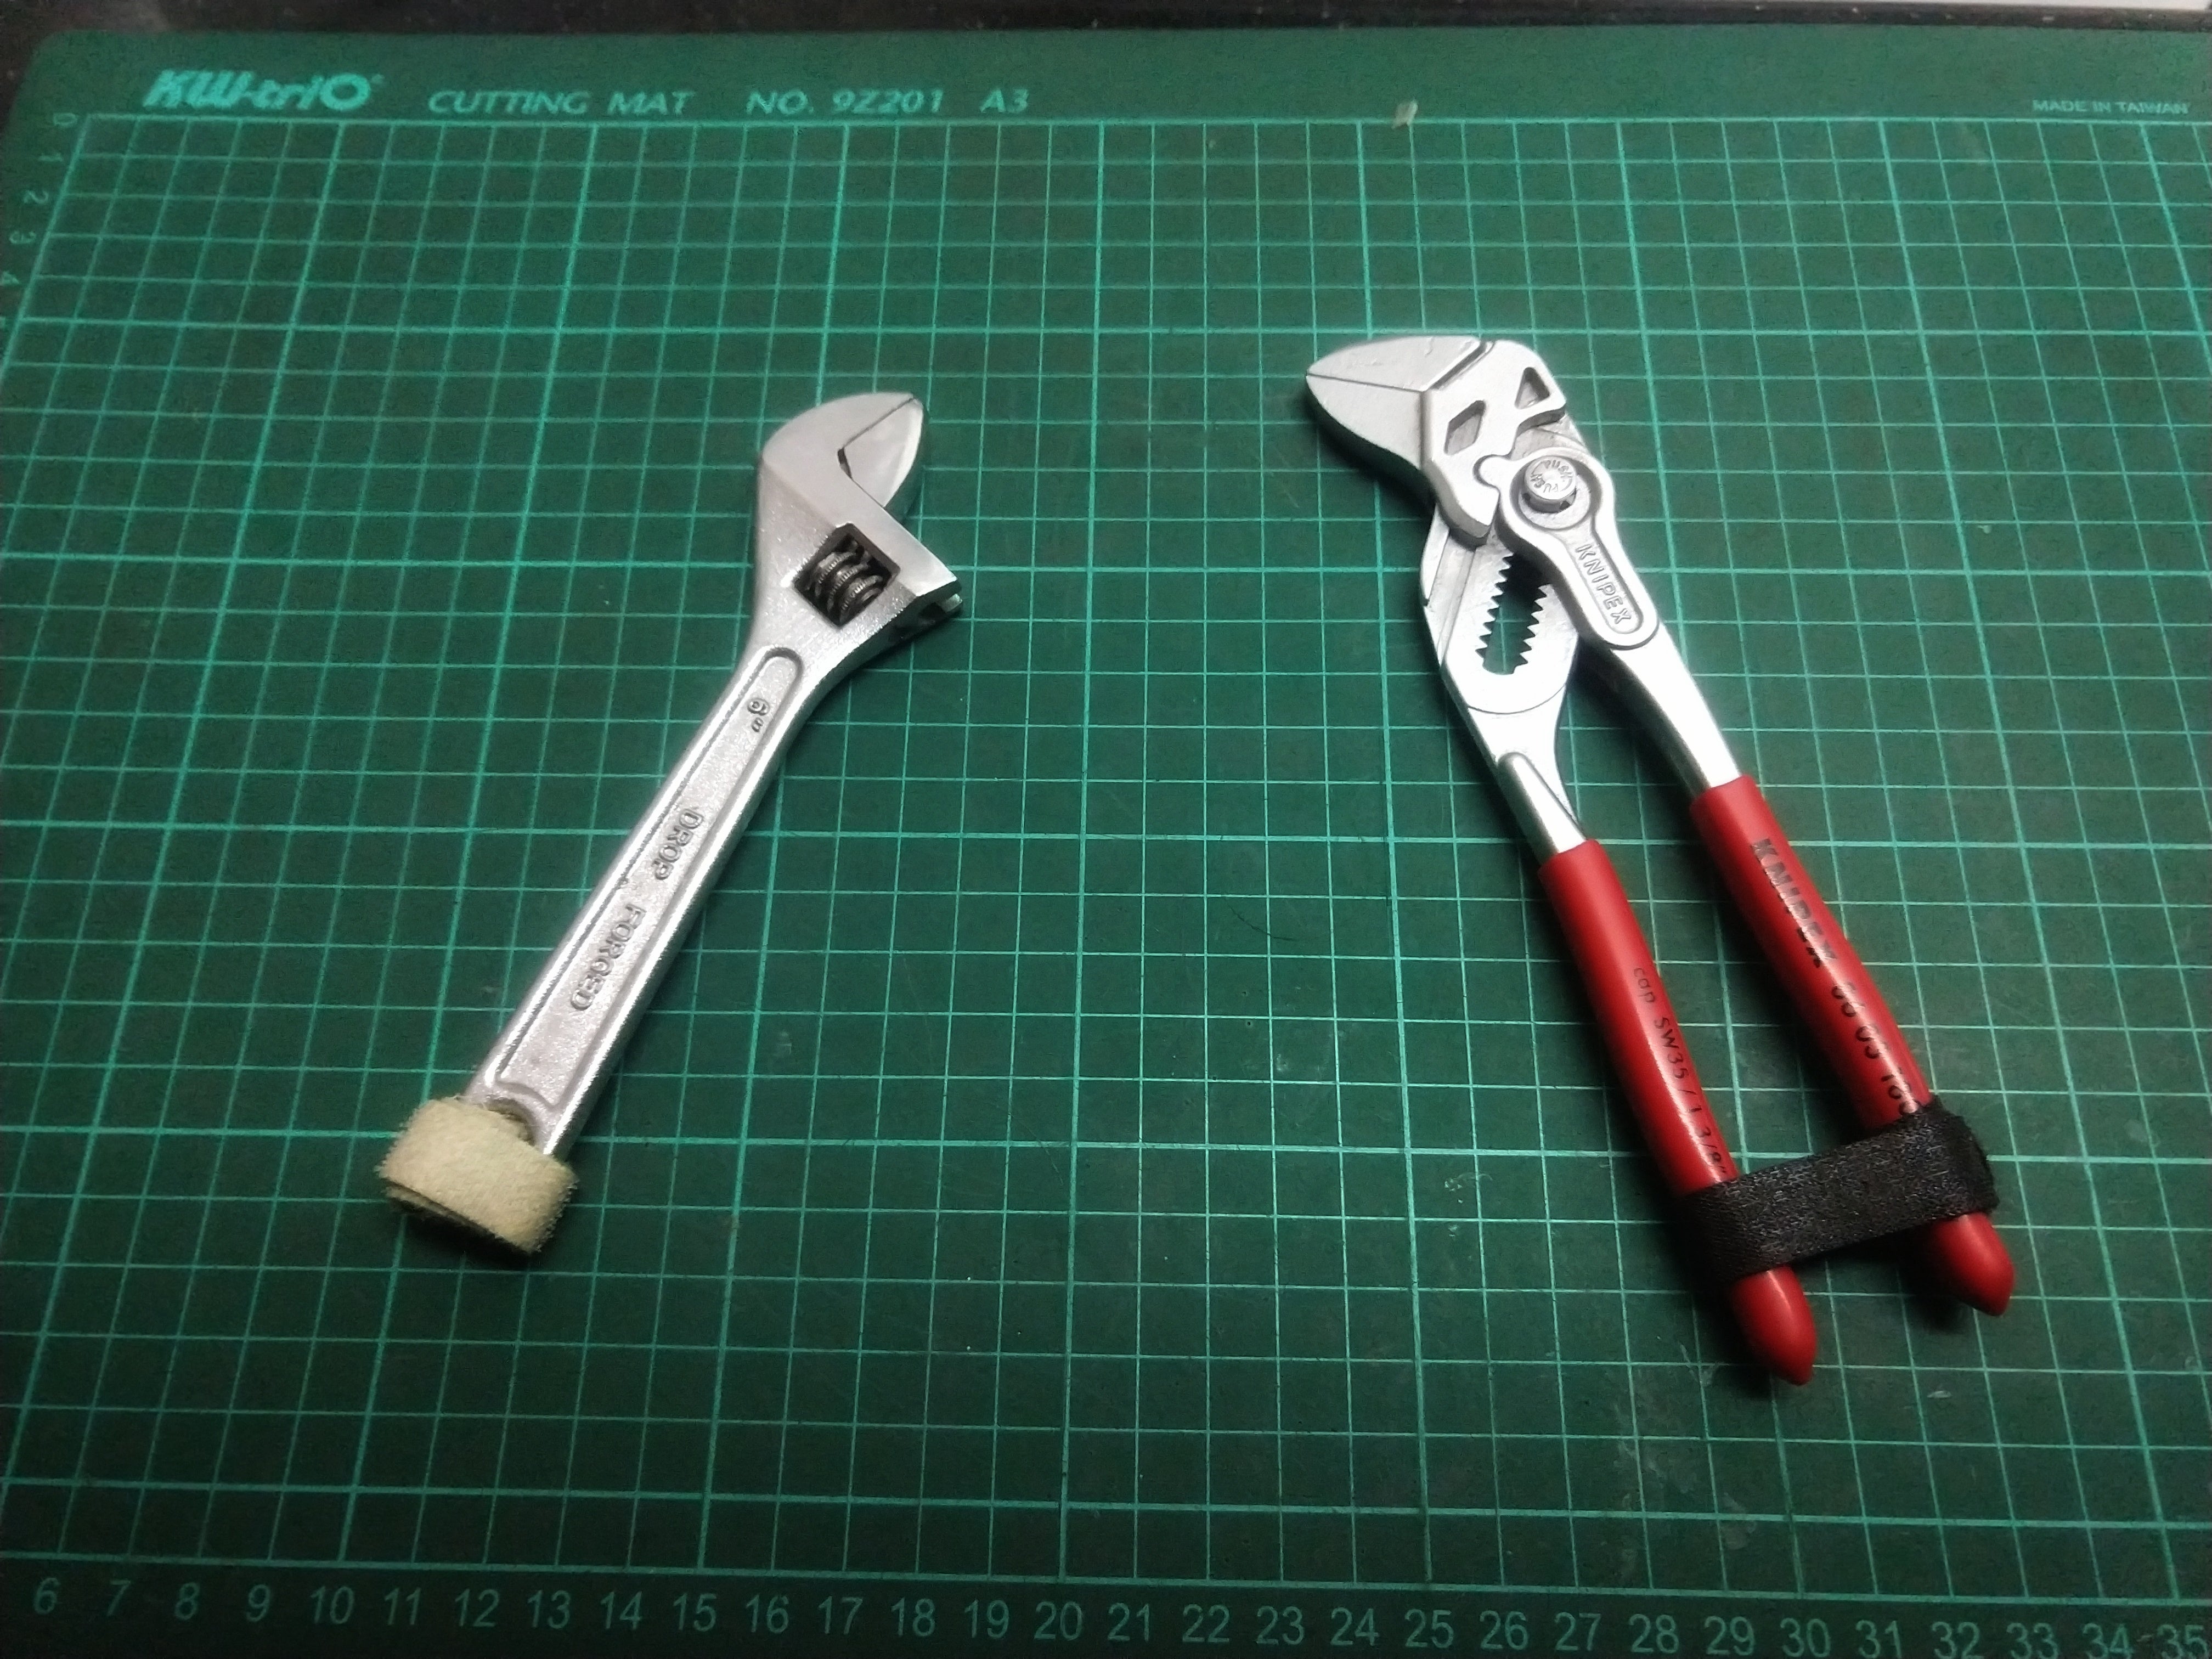 Knipex Plier Wrench - More Than You'd Expect. - Adventure Rider